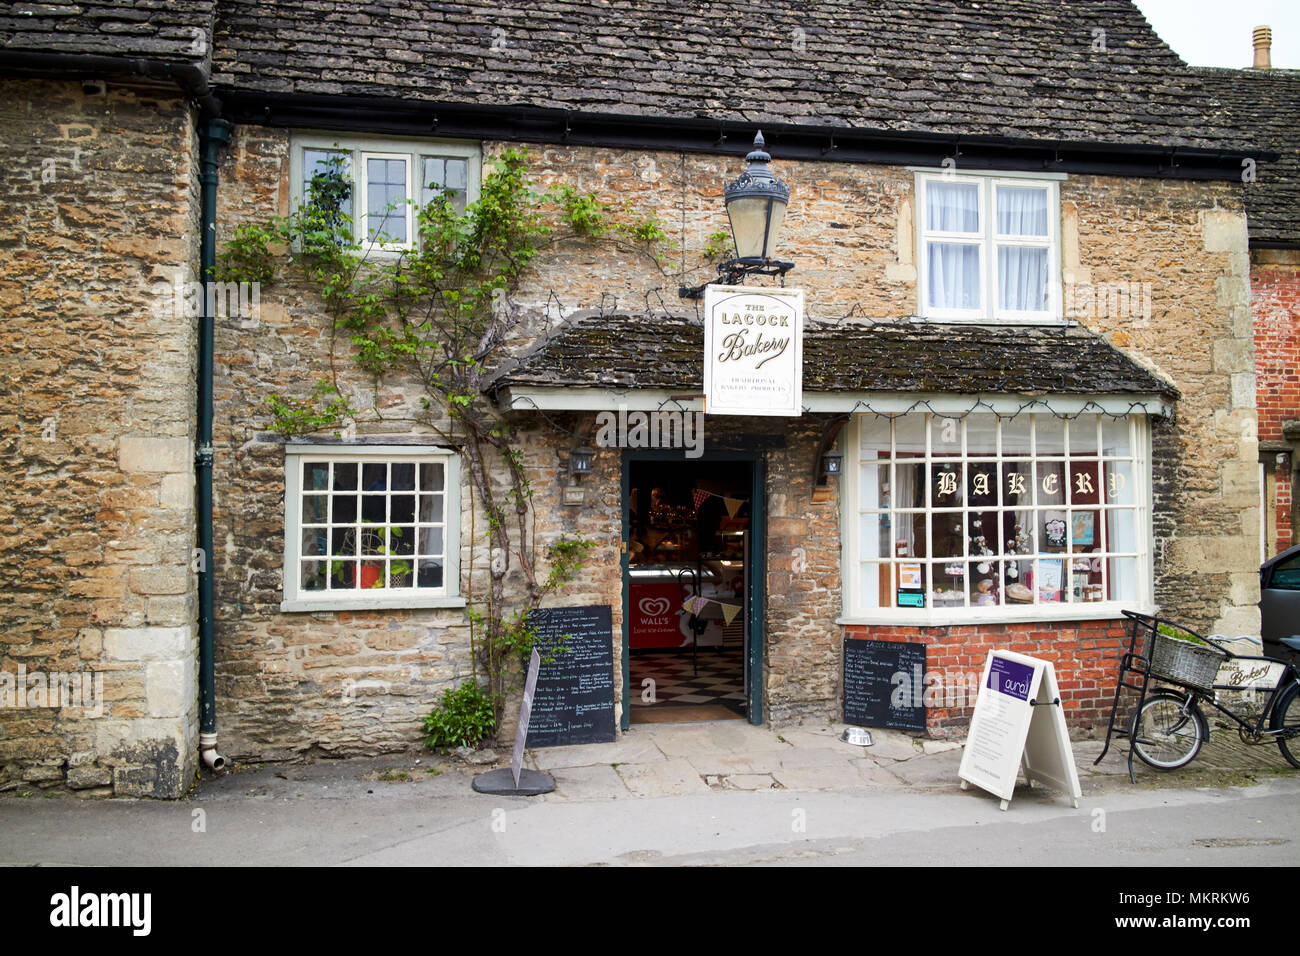 Lacock bakery in an old stone house in the village wiltshire england uk Stock Photo